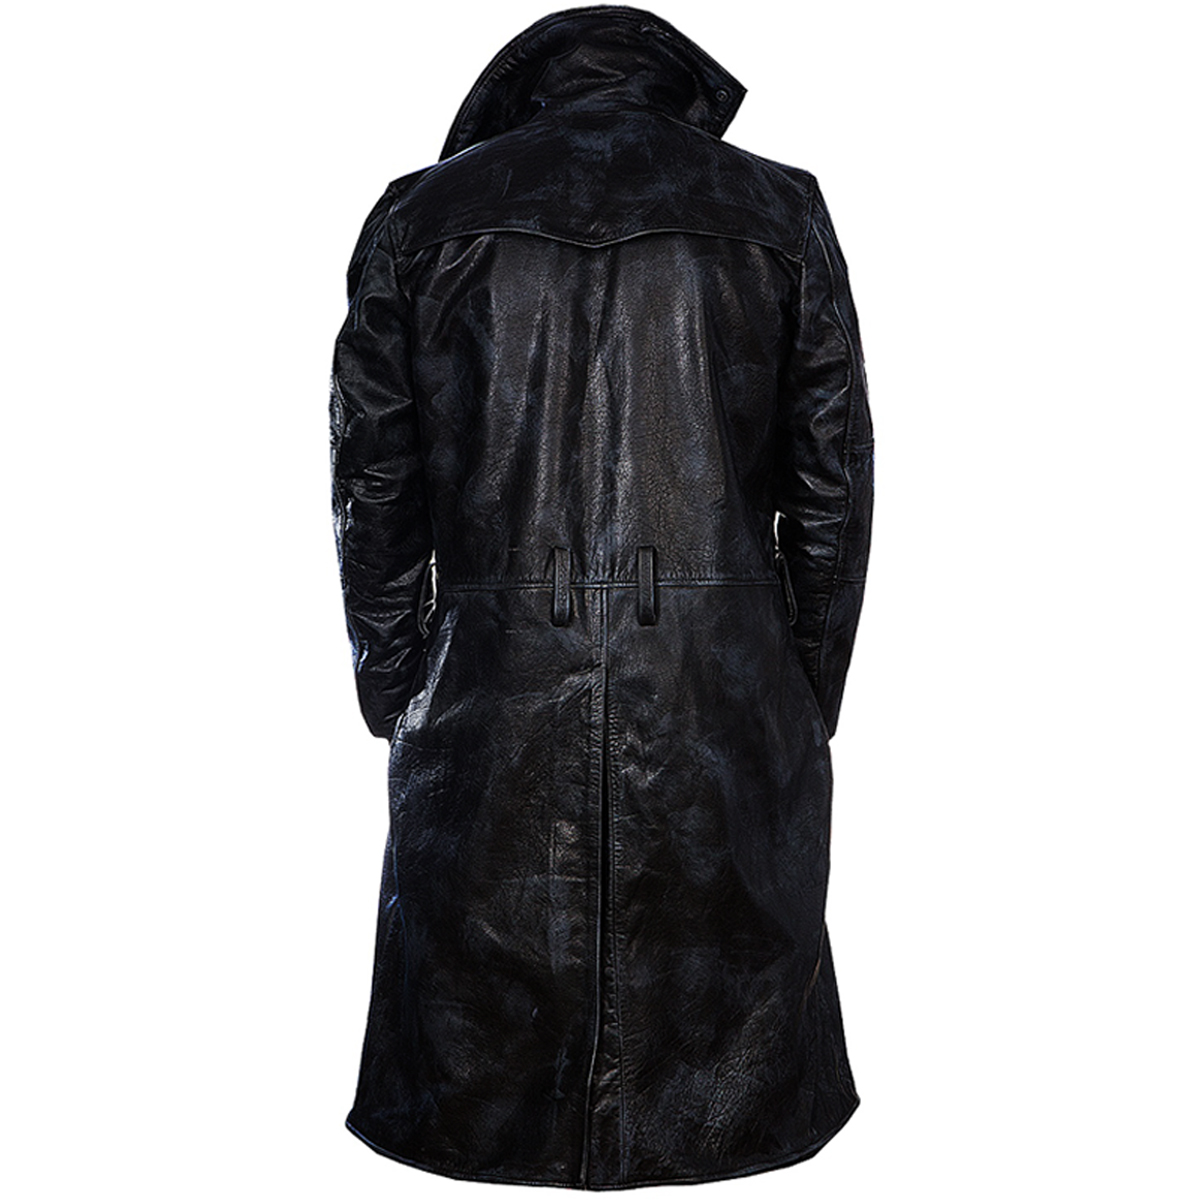 Ryan Gosling Blade Runner 2049 Leather Black trench Coat - Celebs Outfits